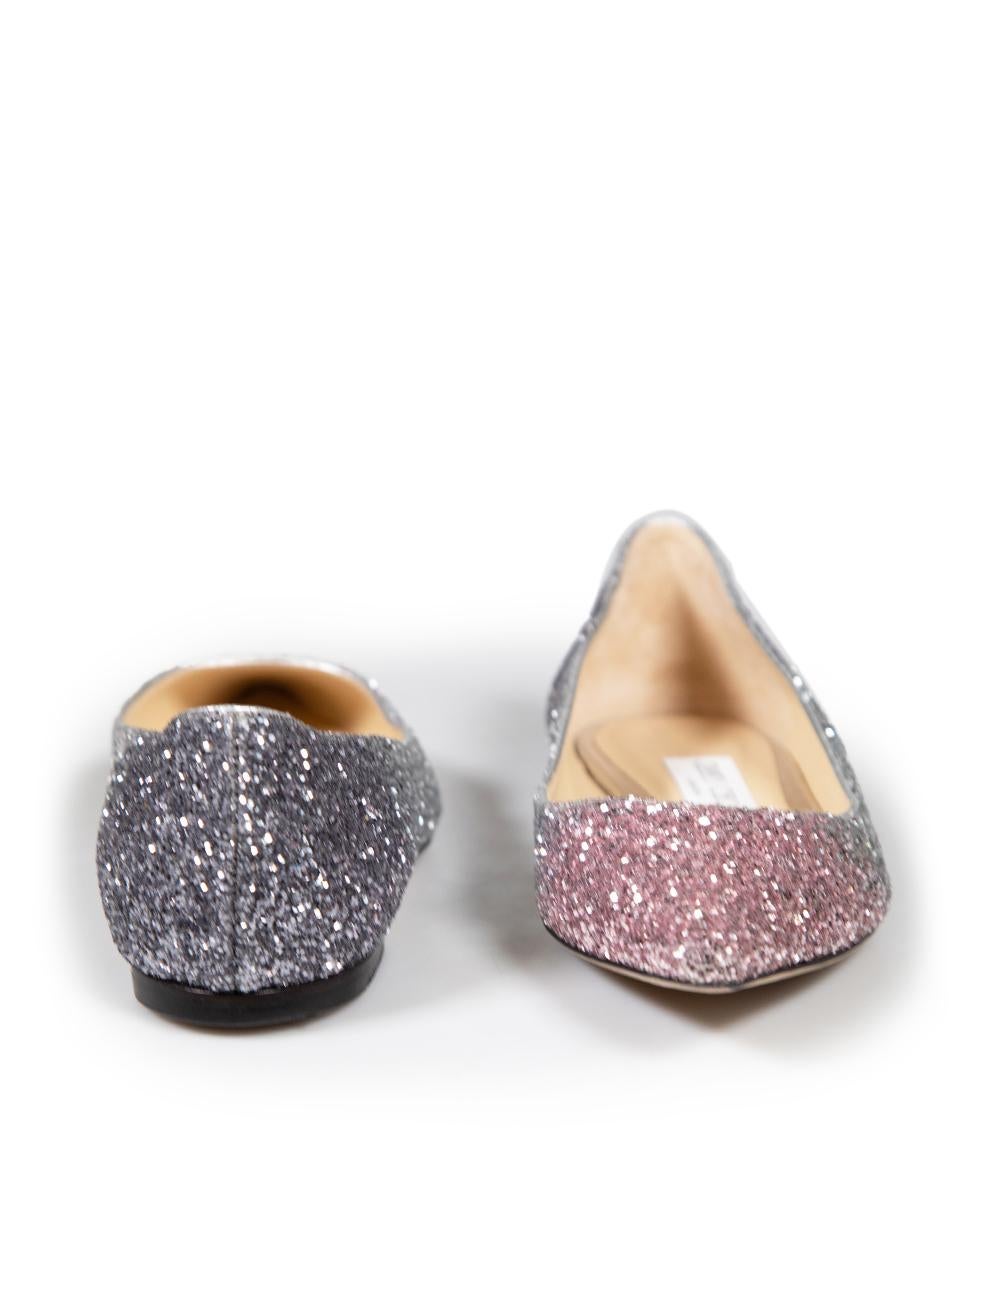 Jimmy Choo Glitter Accent Romy Flats Size IT 36 In Excellent Condition For Sale In London, GB